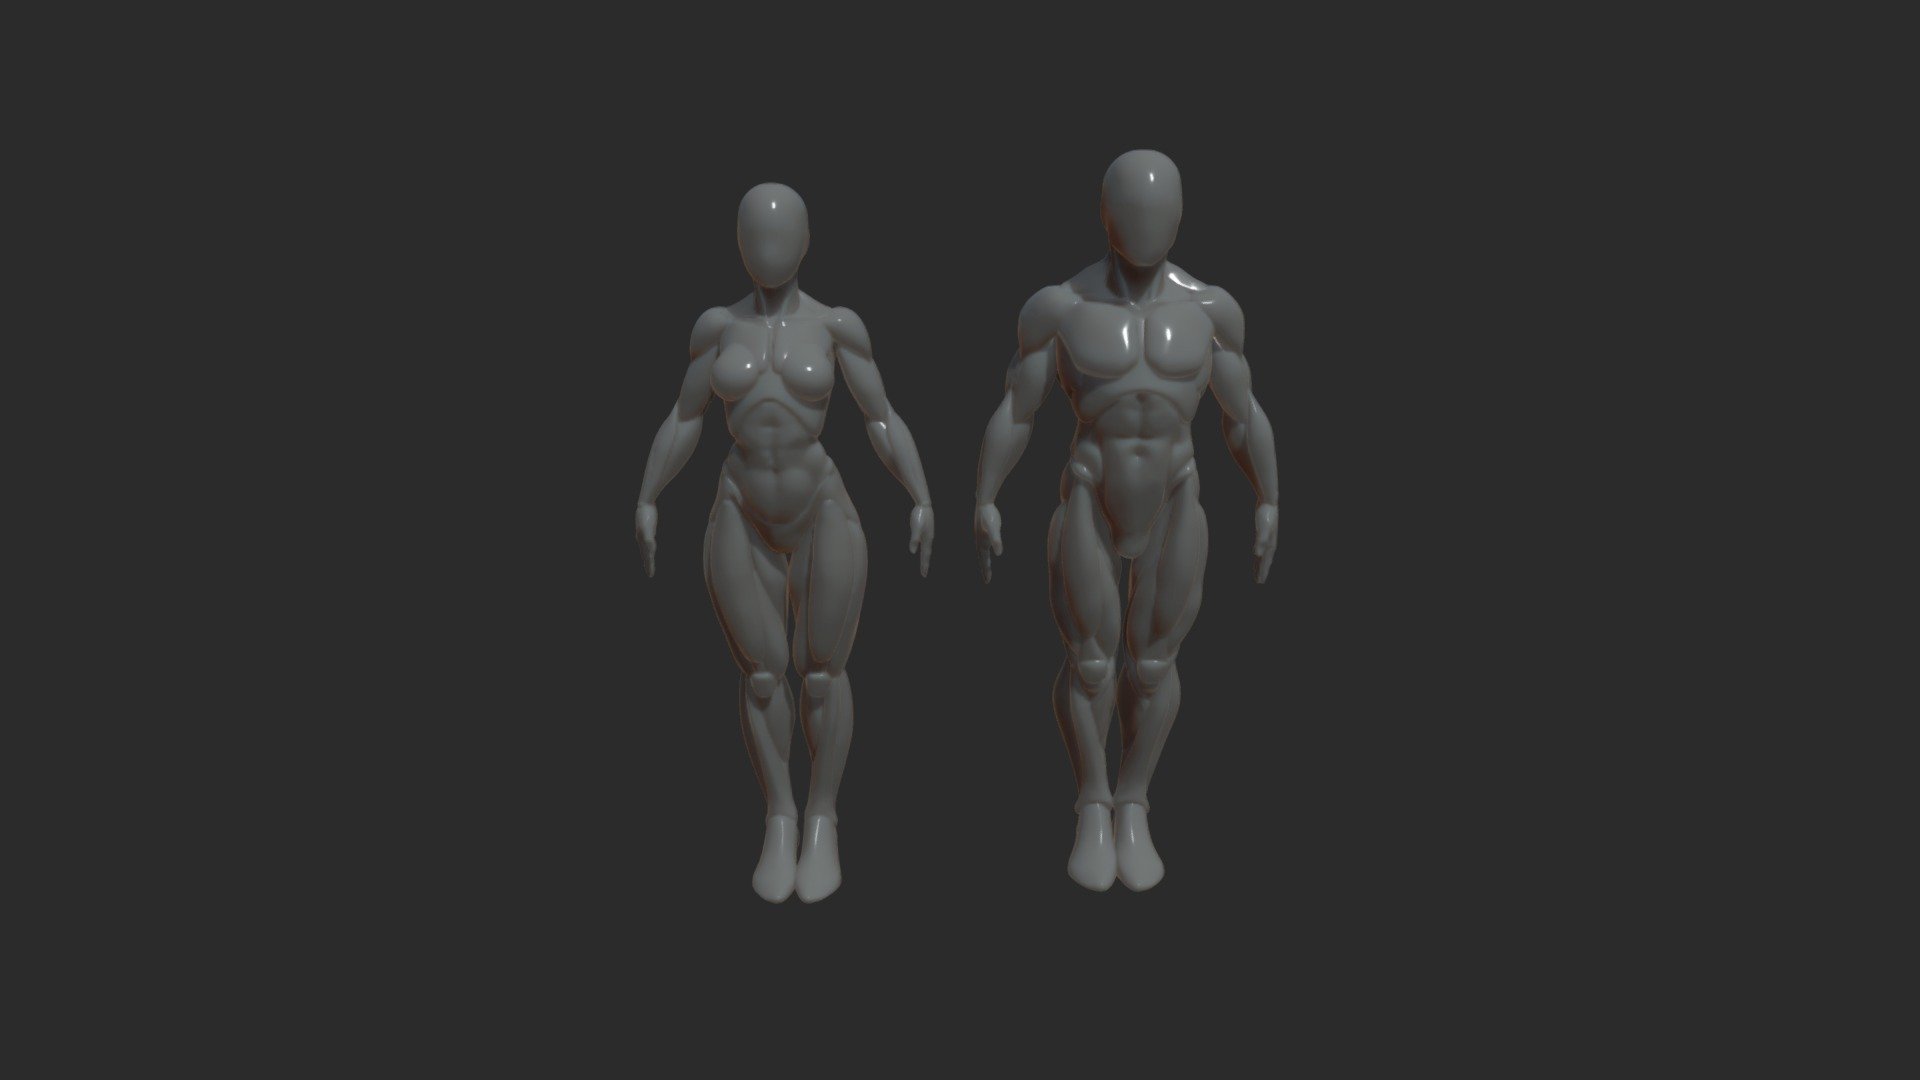 A pack of 3D models that includes both male and female anatomic basemeshes is a collection of digital representations of the human body in its basic form, designed for use in 3D modeling, animation, game development, and other digital art projects. The male and female basemeshes are created to accurately depict the anatomical features, proportions, and body structures of each gender, with a focus on realistic muscle definition and detail. These basemeshes serve as a starting point for creating more complex and detailed 3D models of male and female characters. They can be customized to fit specific project needs, such as adjusting the size, shape, or pose of the character 3d model